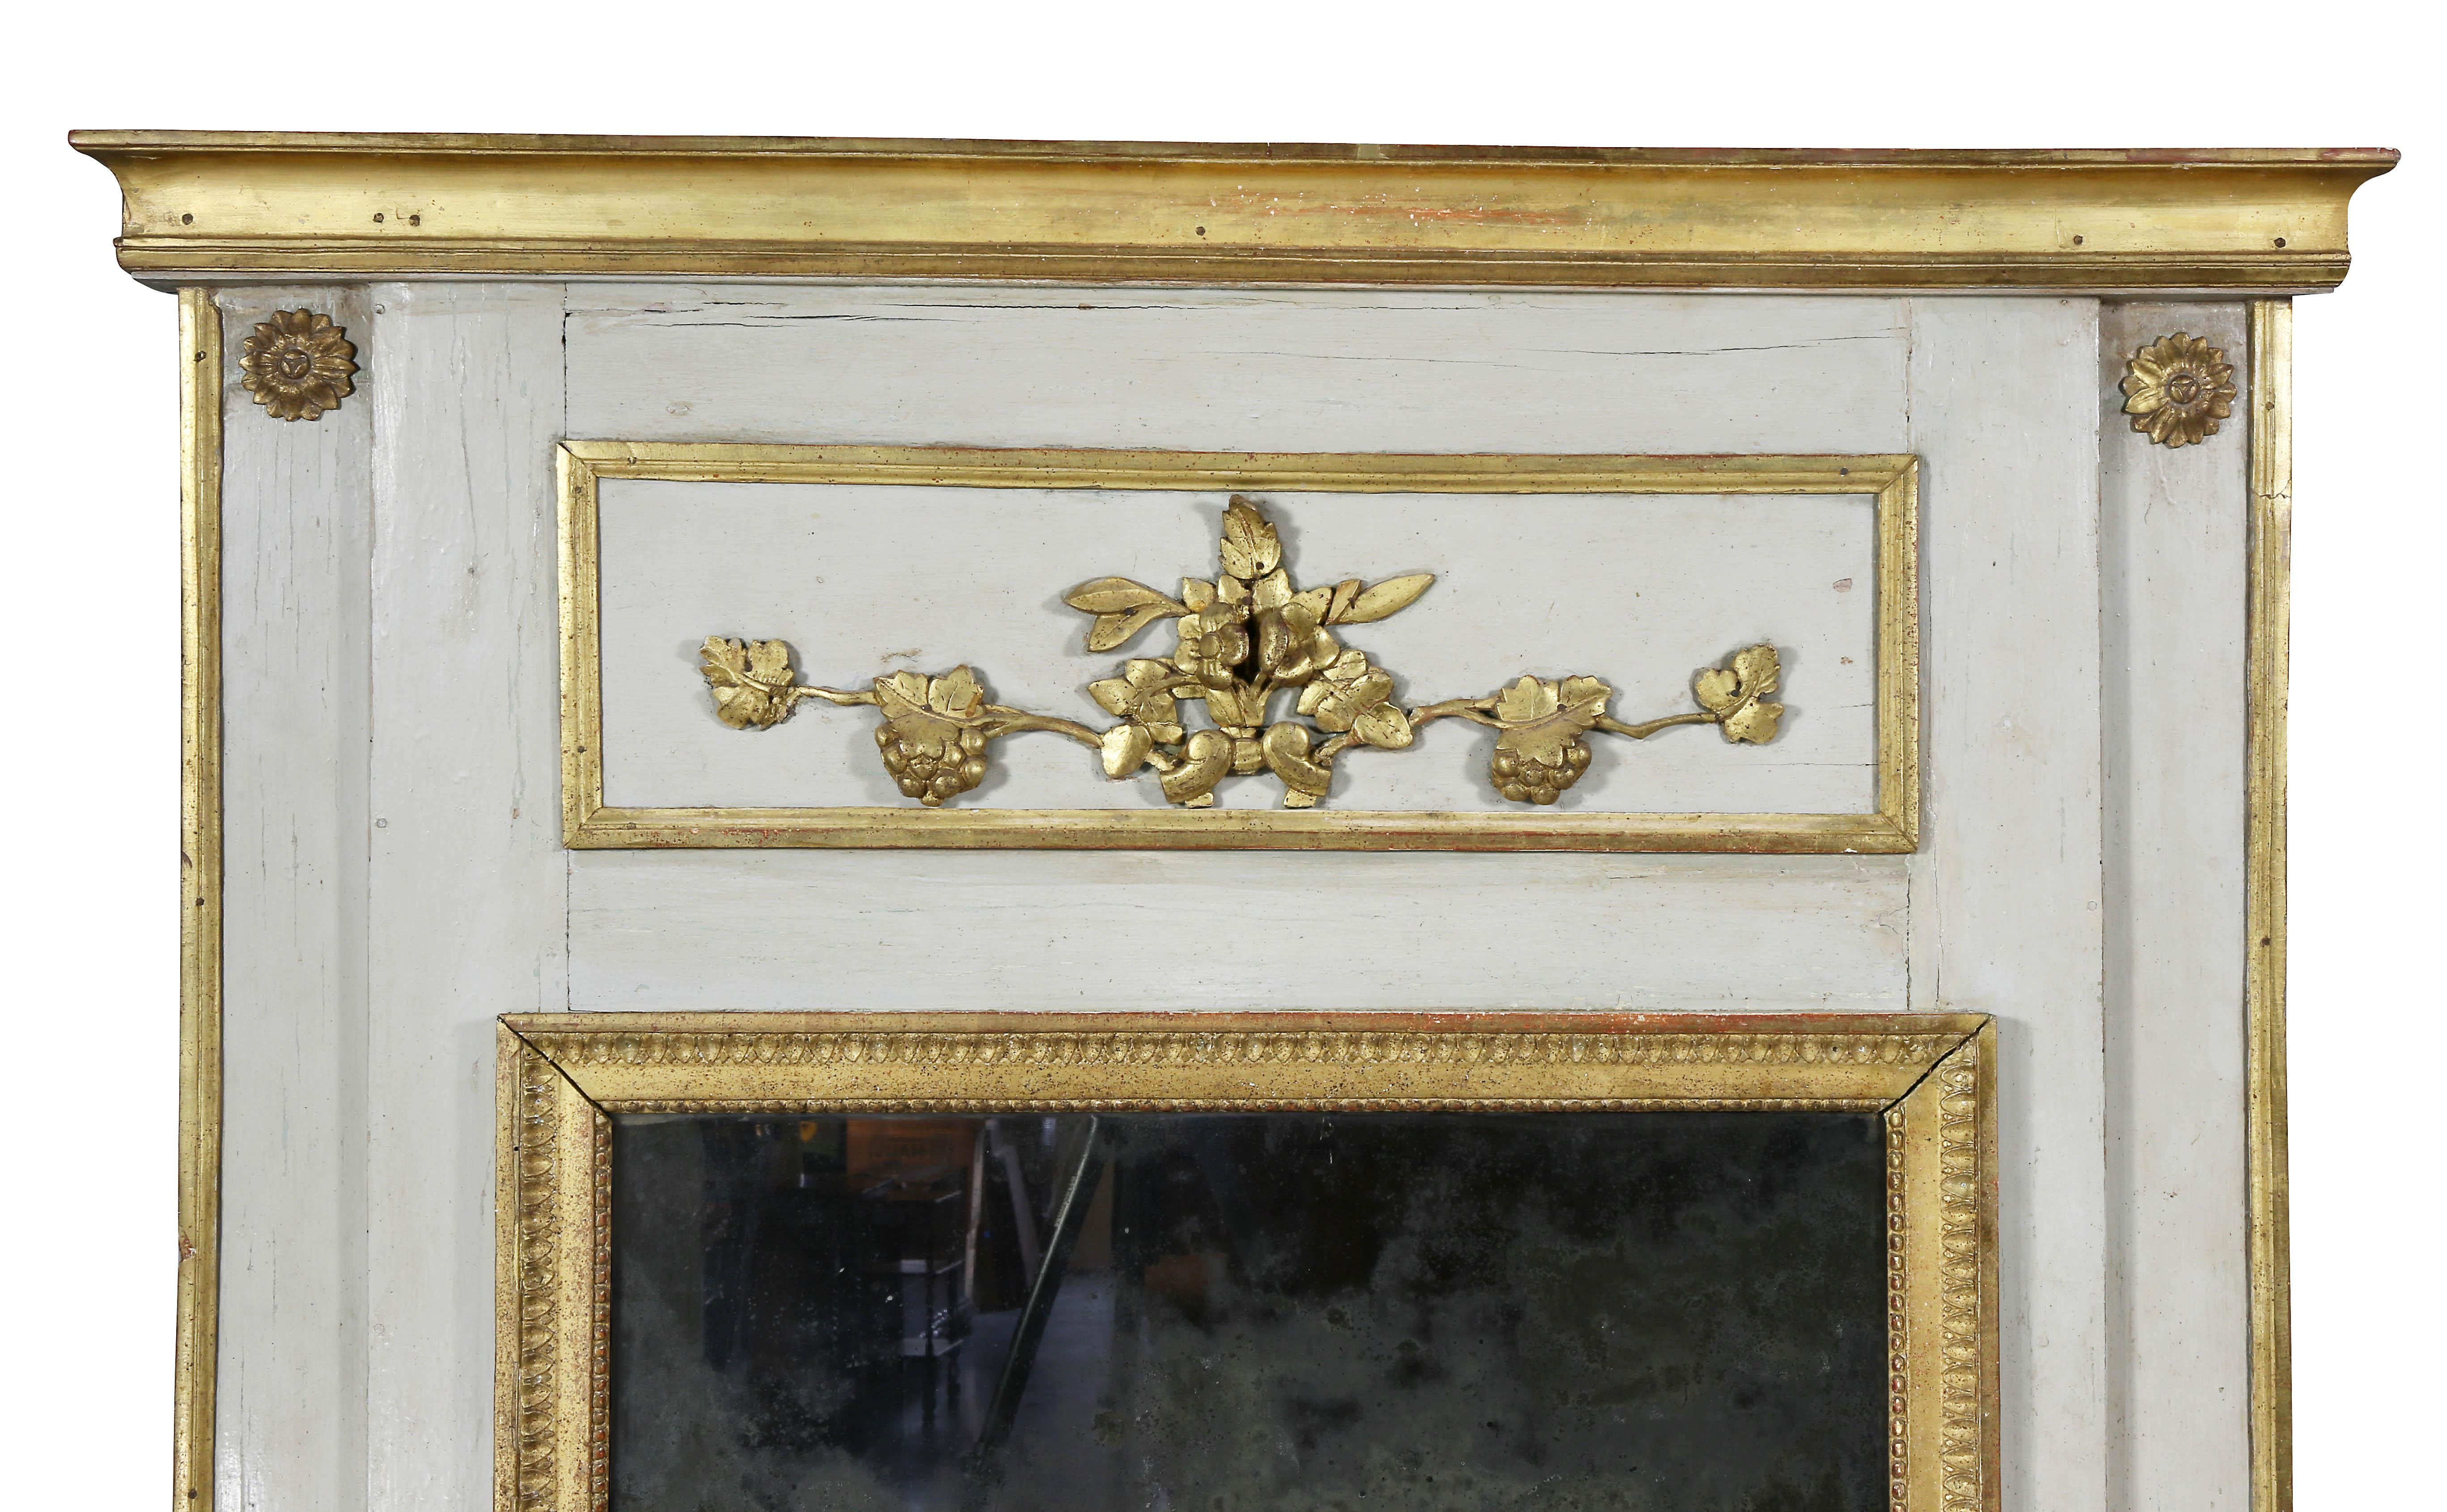 Rectangular molded cornice over a panel with floral and grape carving over a mirror plate with gilded edge and painted surround.